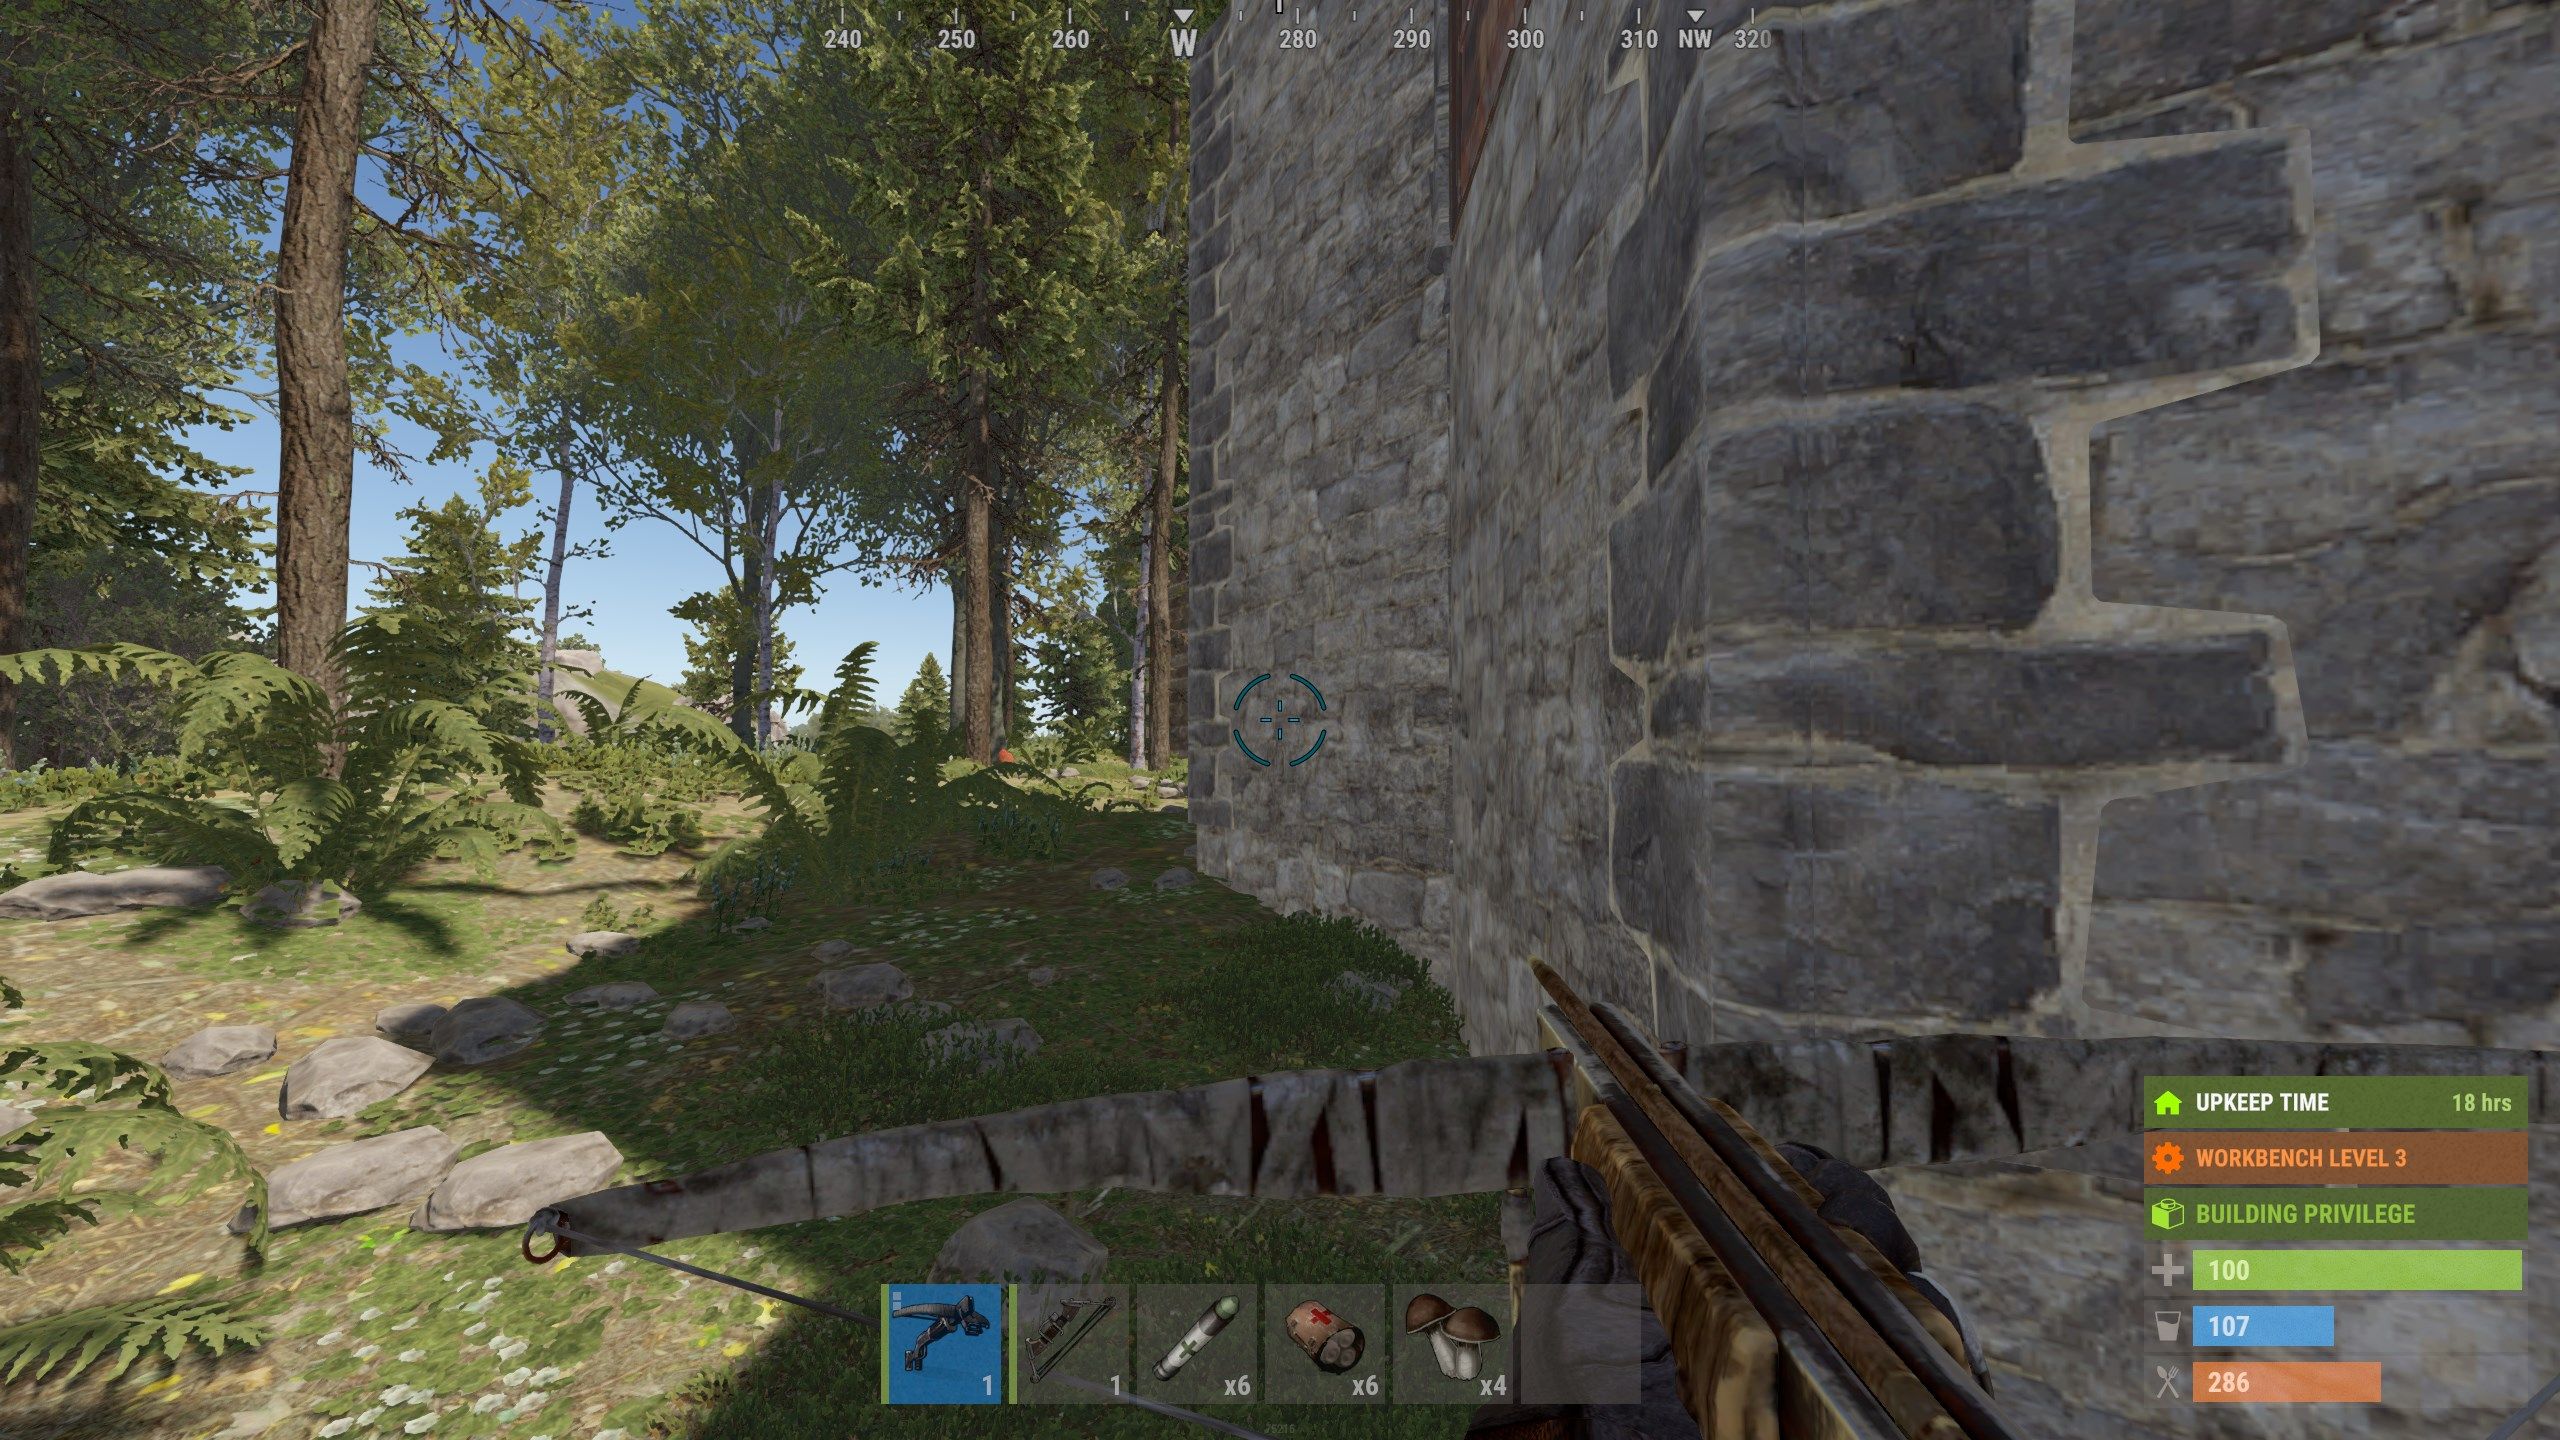 Example 2 - Custom crosshair with crossbow (in Rust PC game)